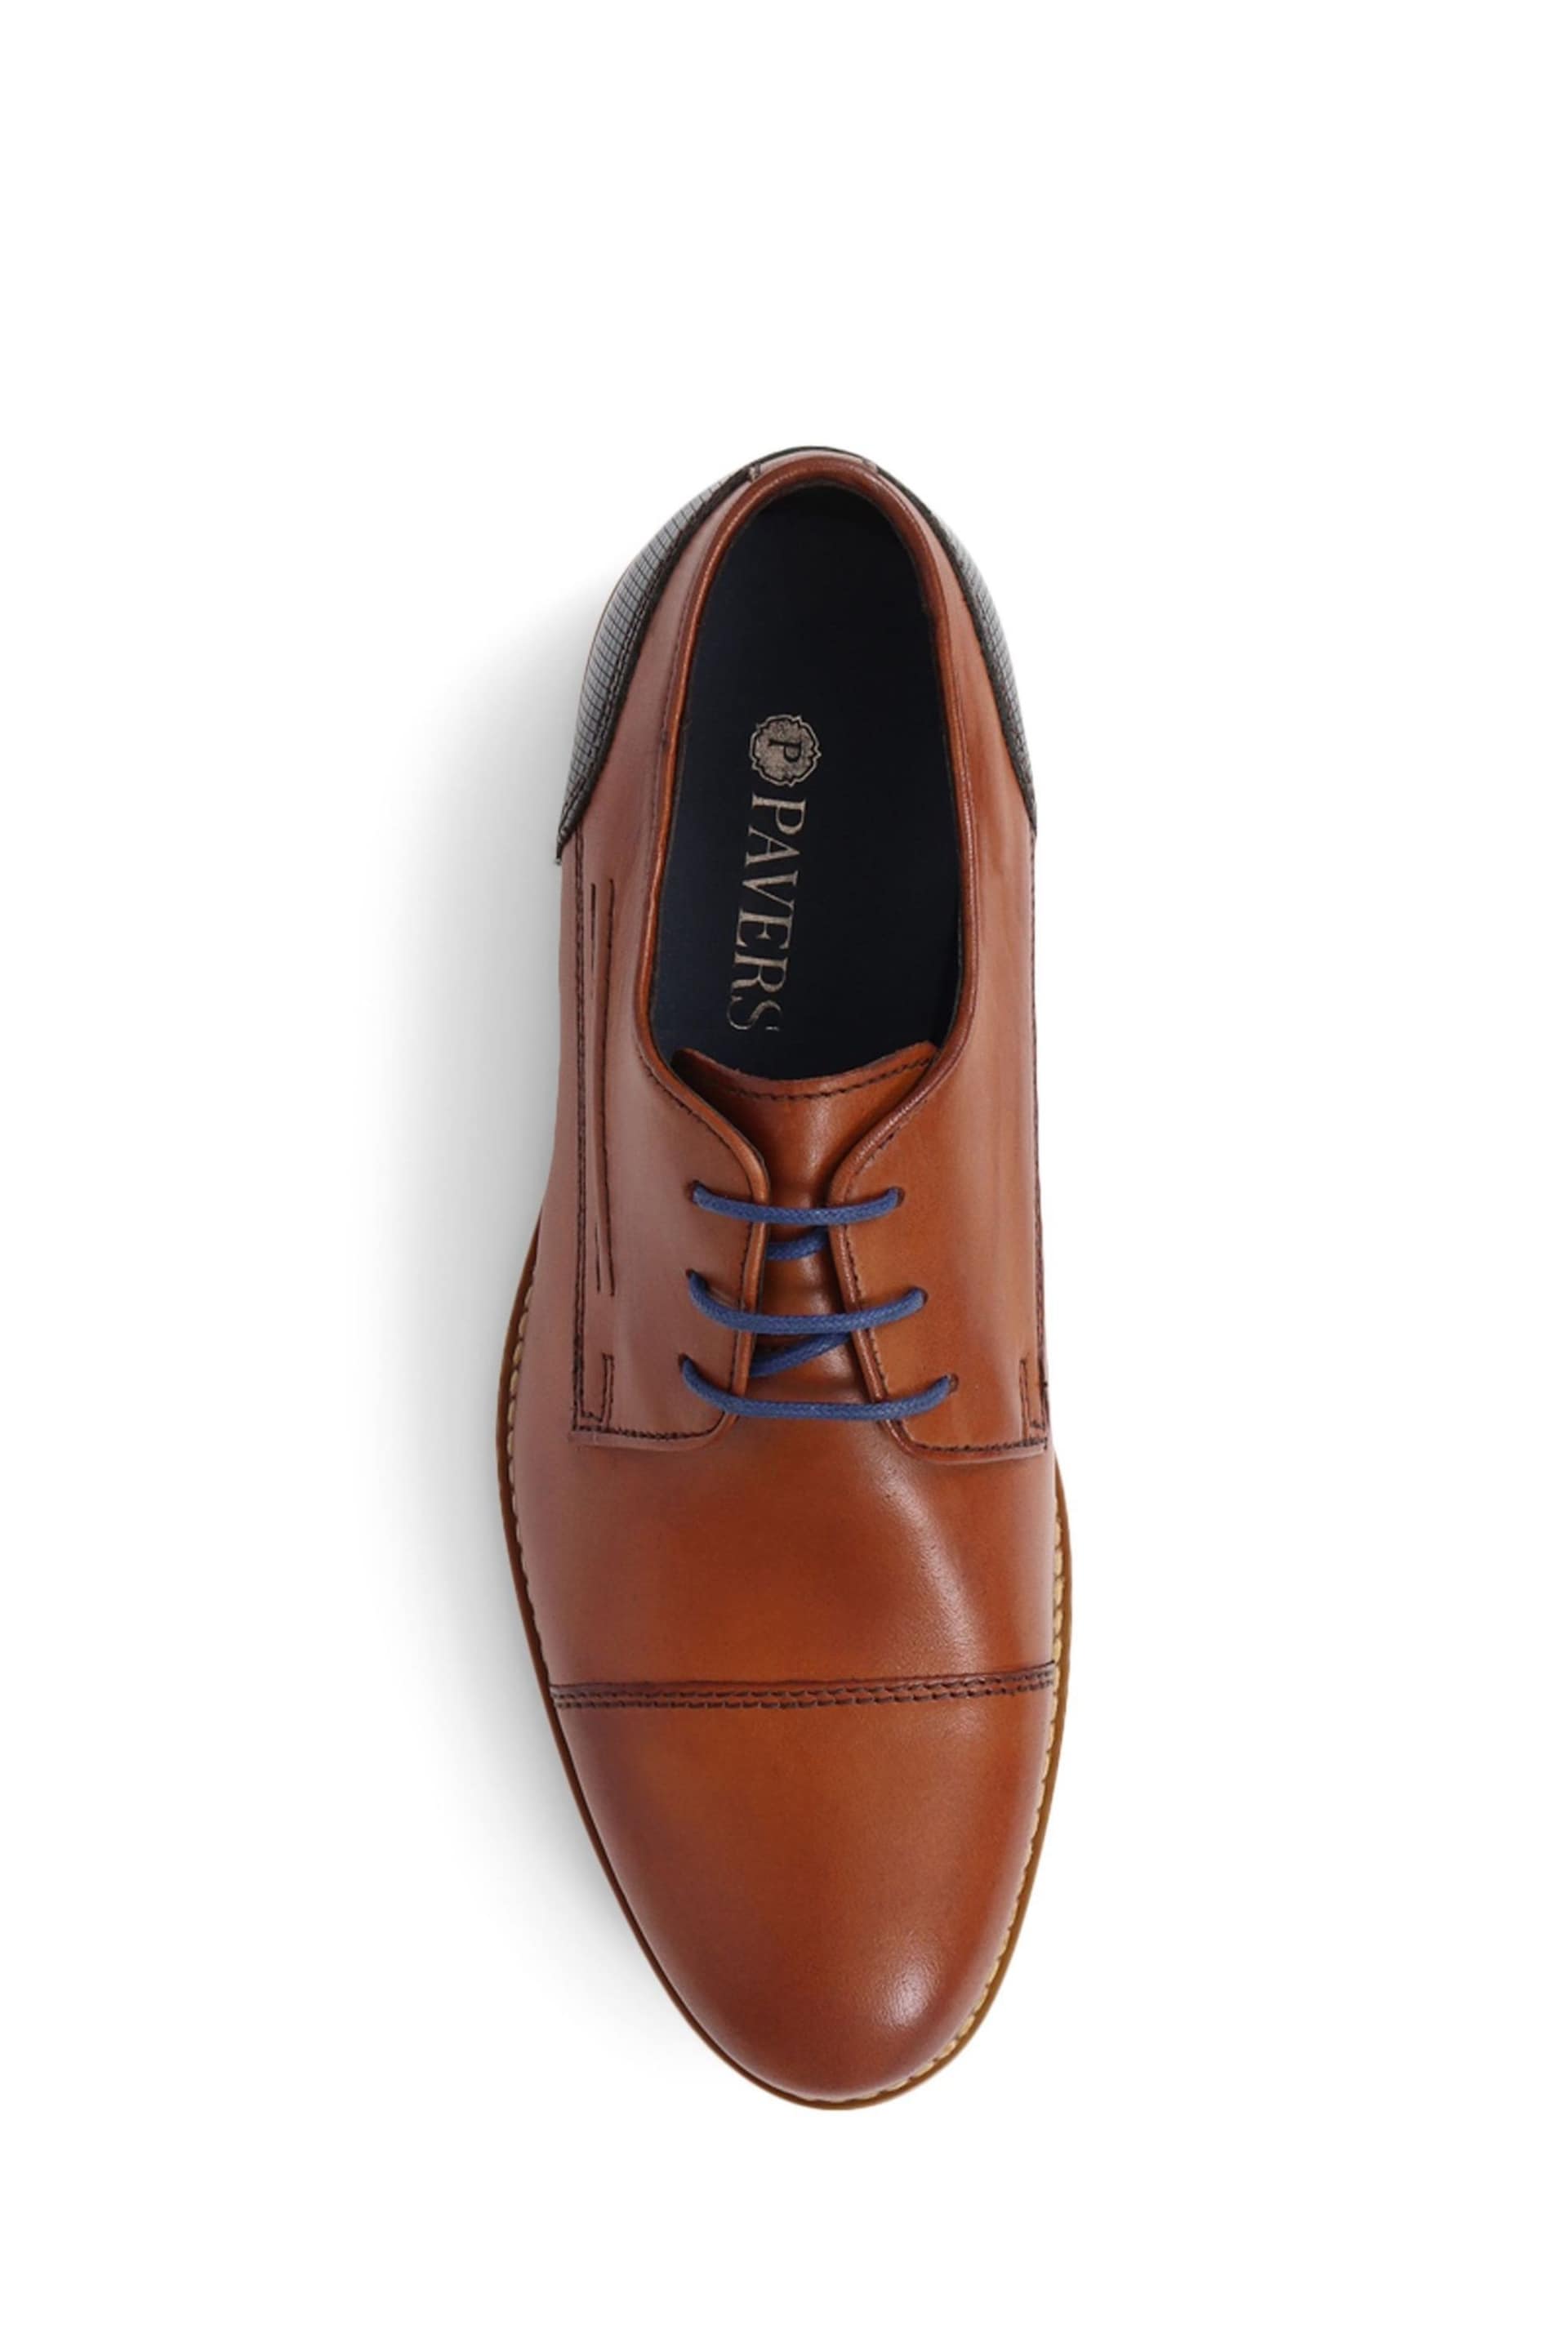 Pavers Smart Leather Brown Shoes - Image 4 of 5